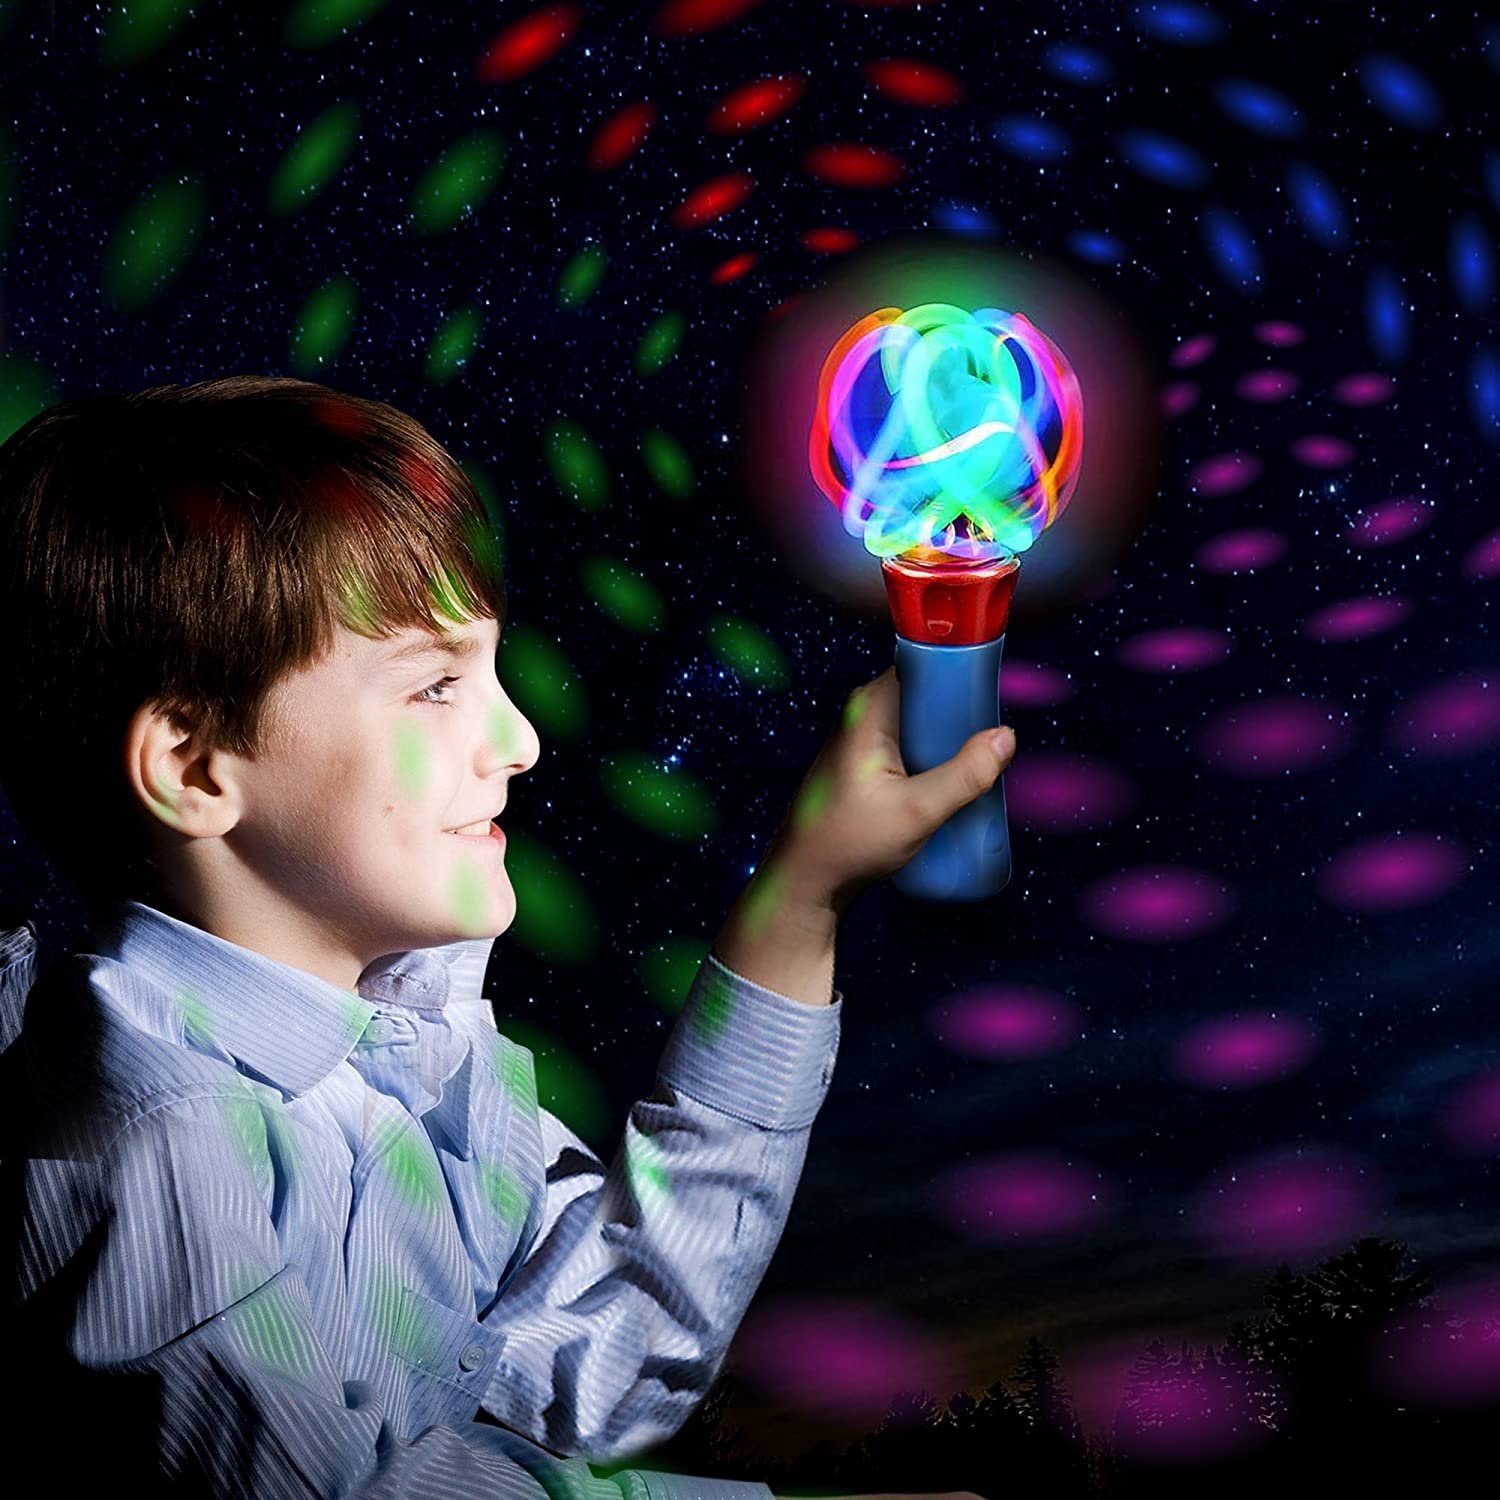 ArtCreativity, Red & Blue Light Up Orbiter Spinning Wands, Sensory Toys for Toddlers, Set of 2, 7" LED Spin Toy, Autistic Children, Boys, Girls, Birthday, Classroom Prizes